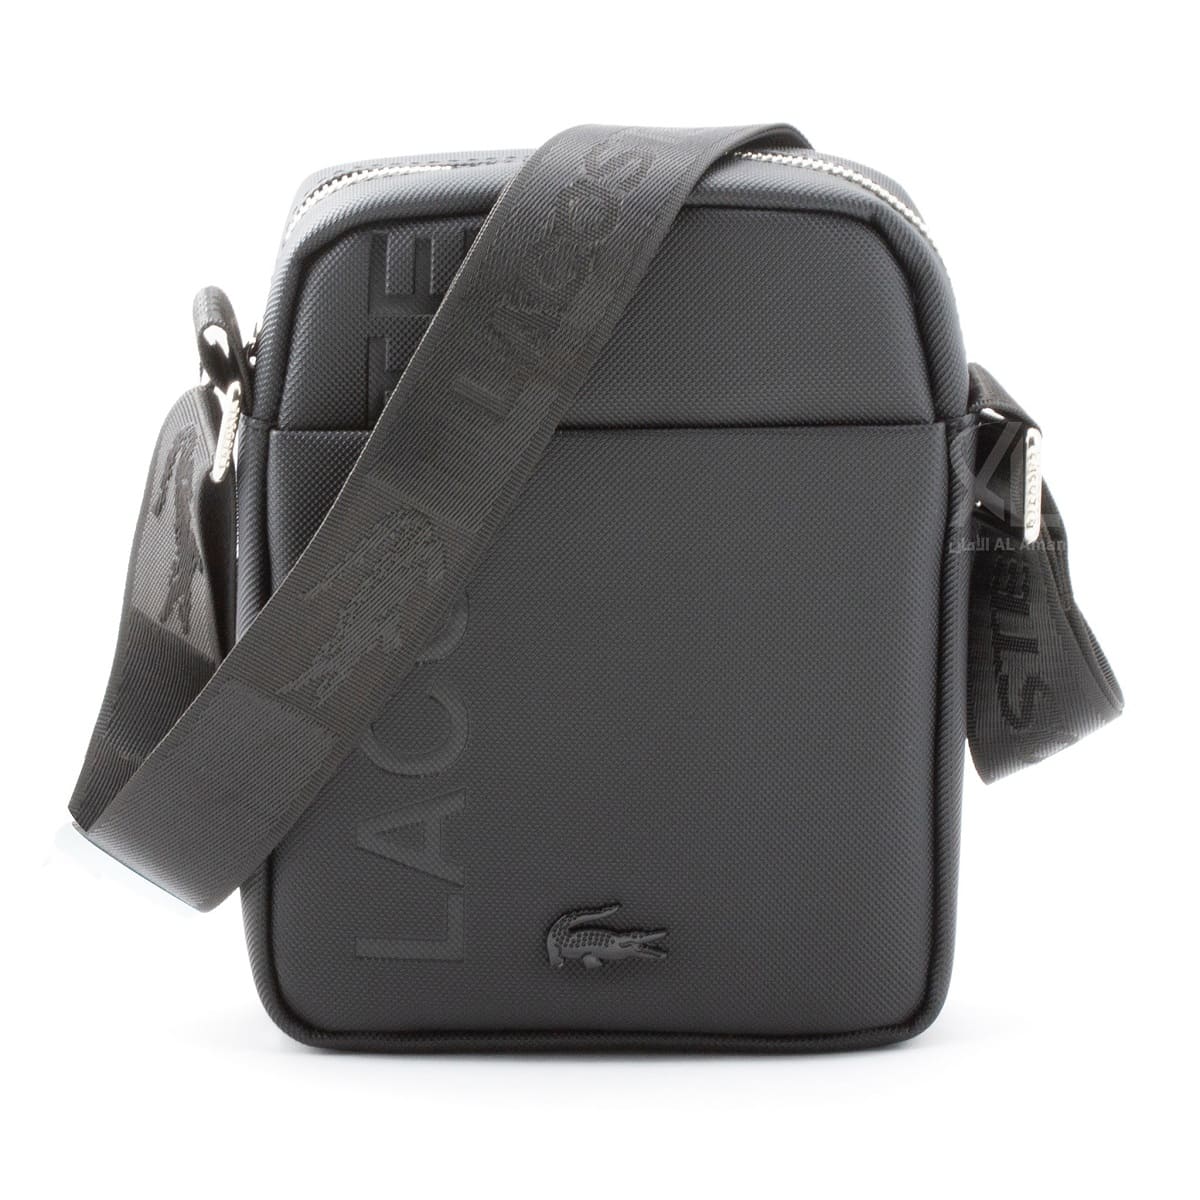 Lacoste-crossbag-with-hand-black-color-leather-for-men